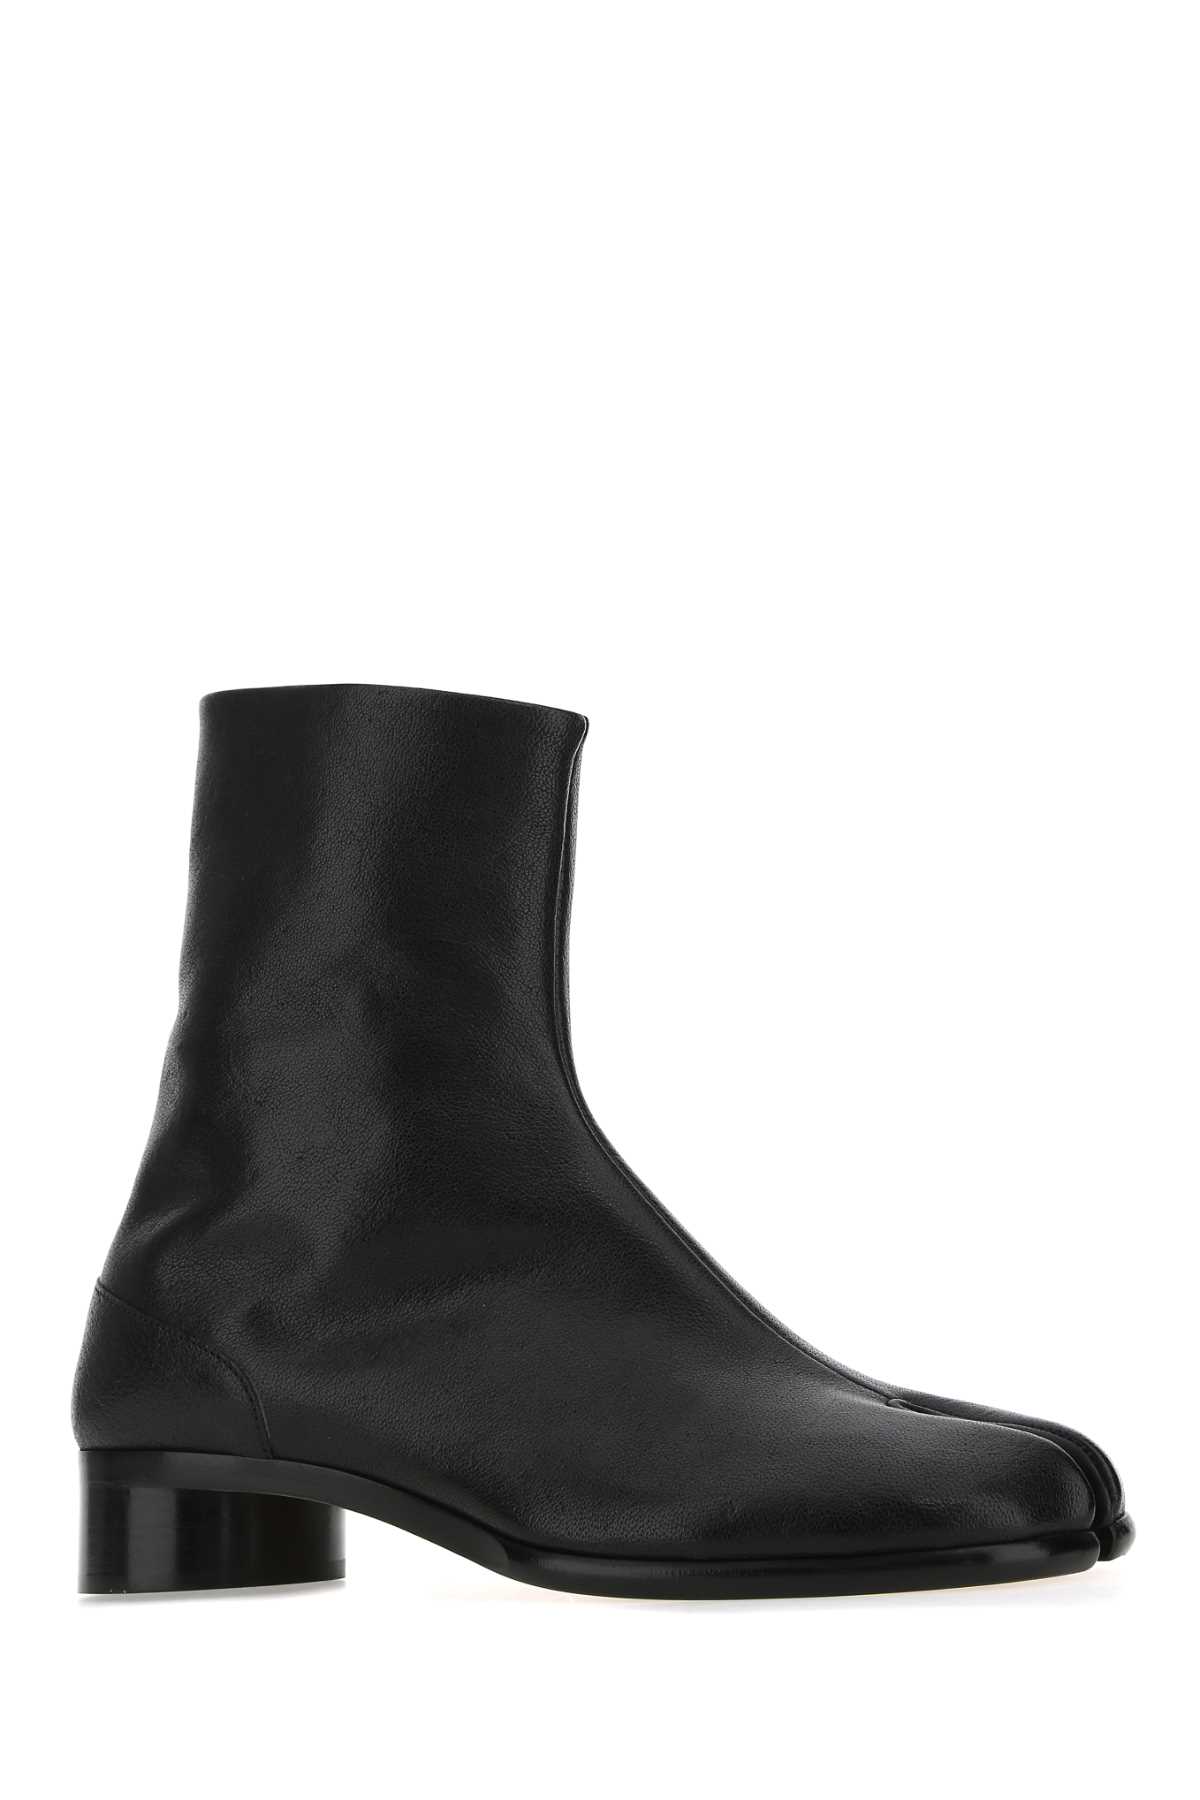 Maison Margiela Black Leather Tabi Ankle Boots In T8013